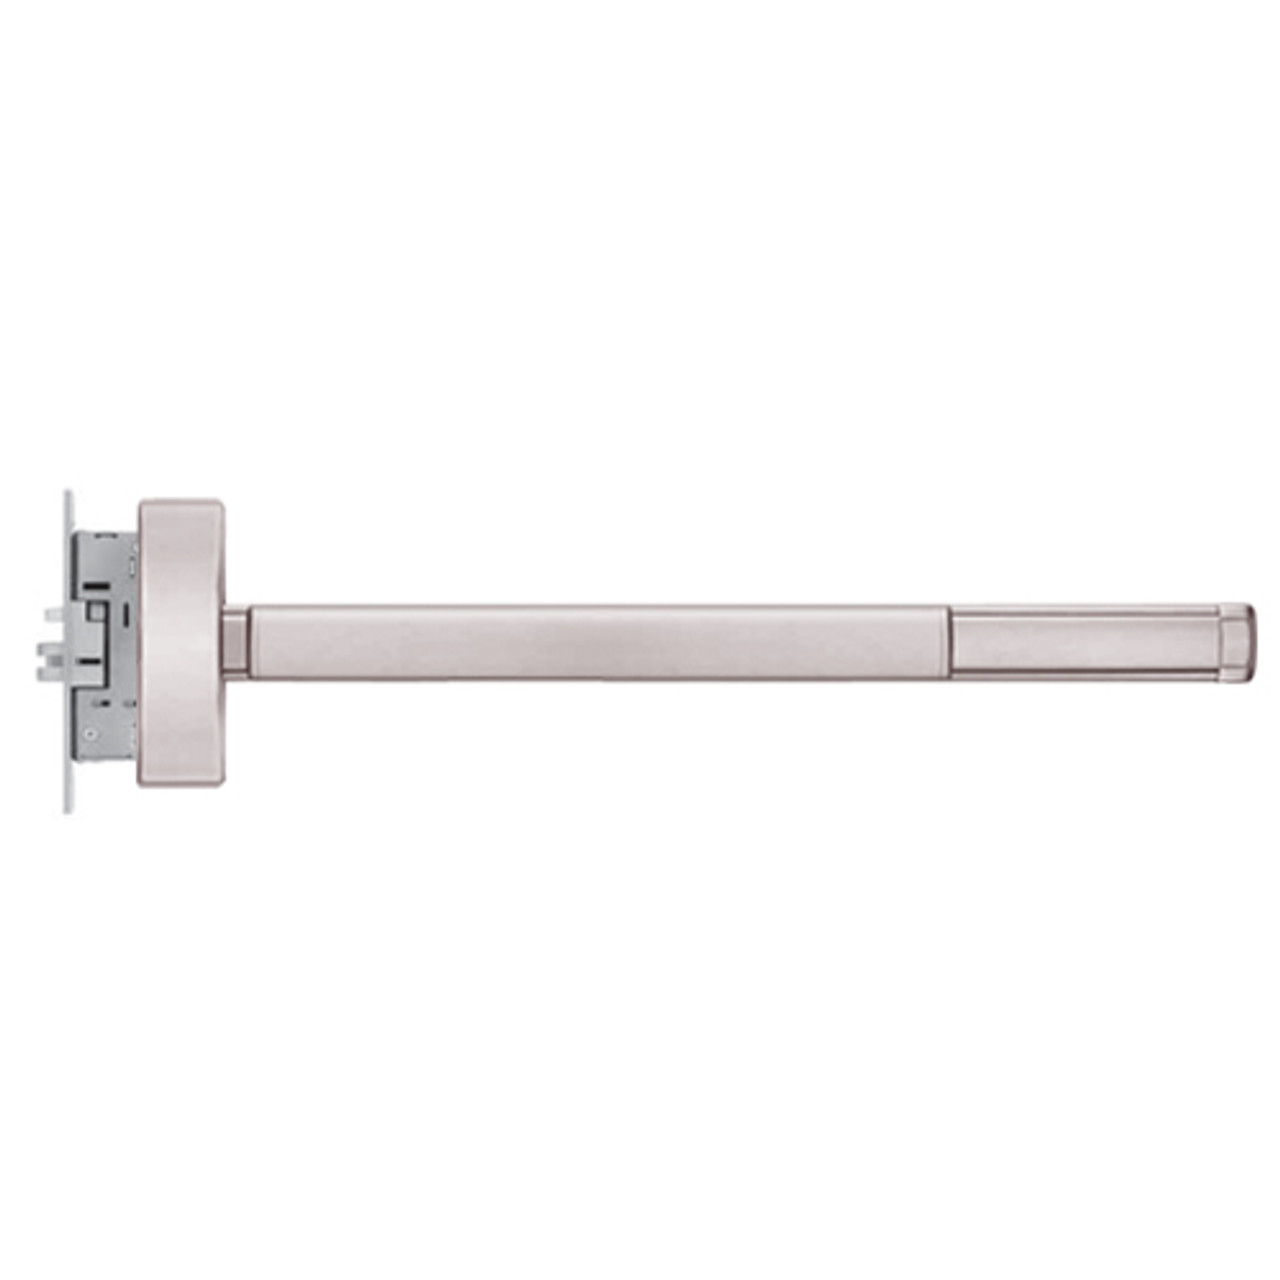 TSFL2314-RHR-628-36 PHI 2300 Series Fire Rated Apex Mortise Exit Device with Touchbar Monitoring Switch Prepped for Lever-Knob Always Active in Satin Aluminum Finish